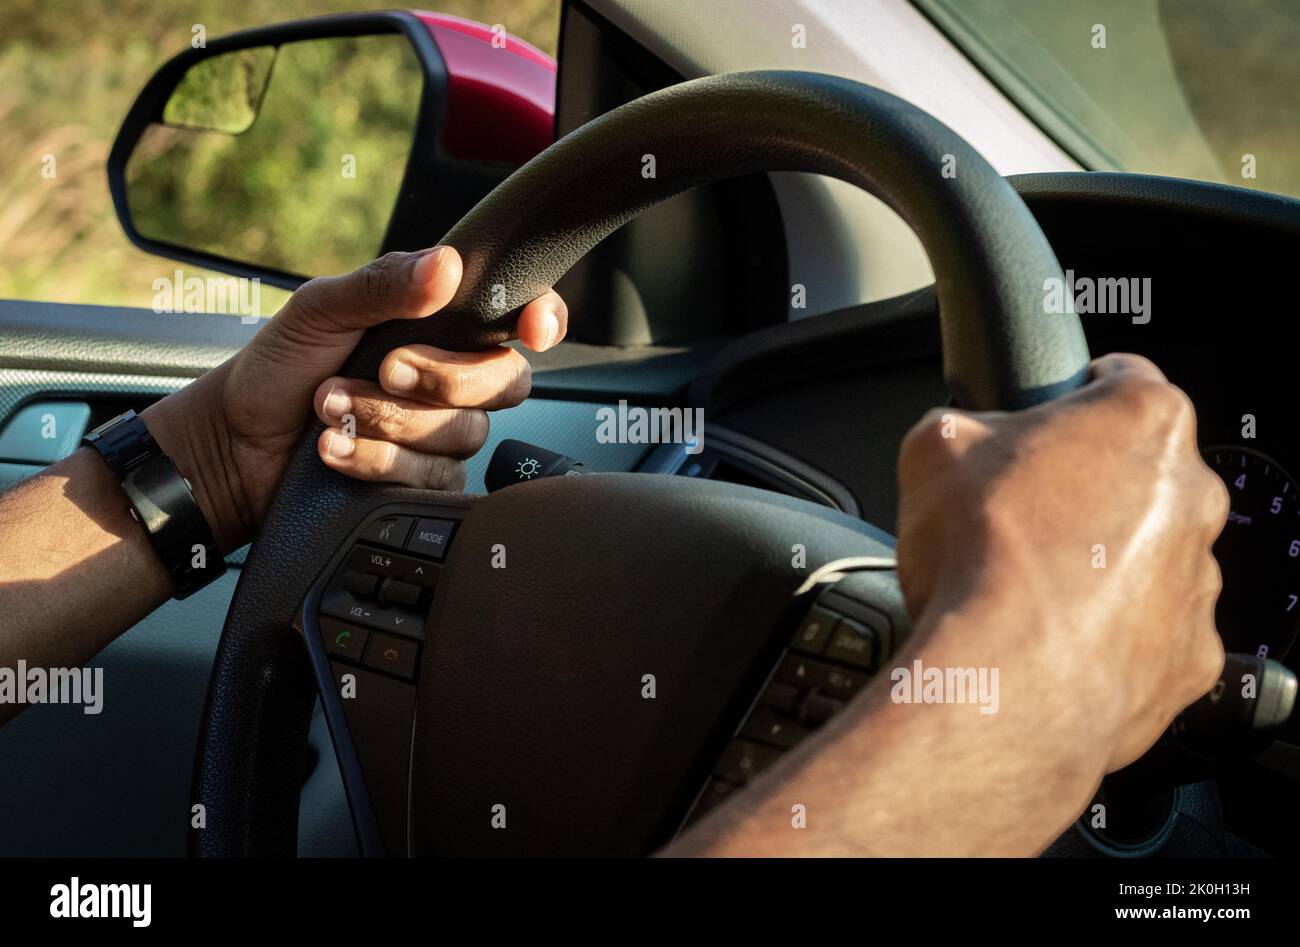 The hand is holding the steering wheel of the car Safe driving. Close-up Of A Man Hands Holding Steering Wheel While Driving Car Stock Photo